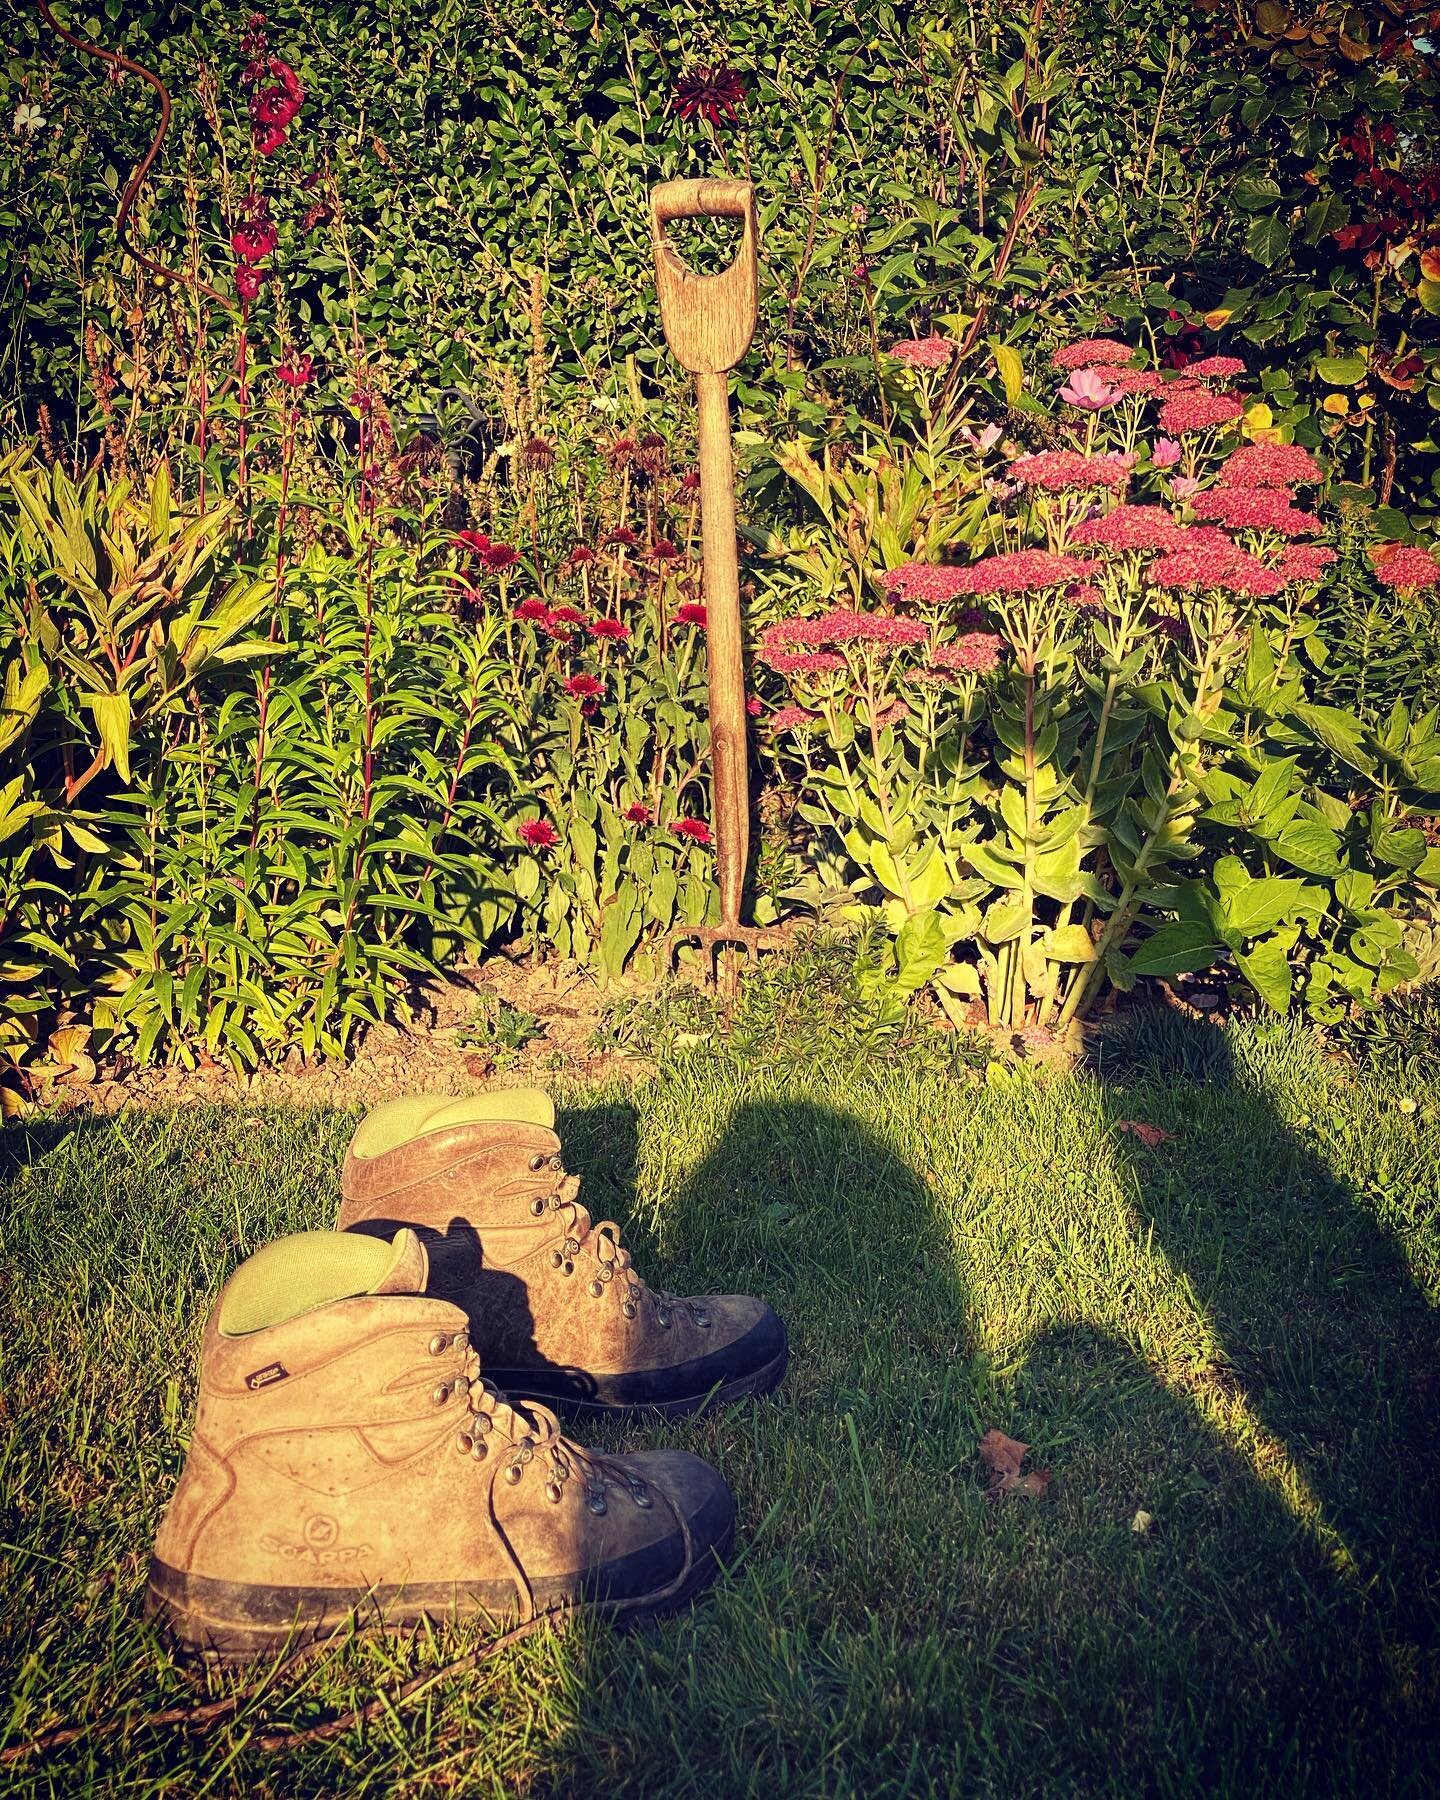 It&rsquo;s time for some bare foot gardening ... I love to feel the soil  under foot especially when the ground is so warm .... it&rsquo;s vital to get in touch with nature .... try it .... it&rsquo;s wonderful 🌿🙏🌱
.
.
.
#bootsoff 
#gardener 
#gar